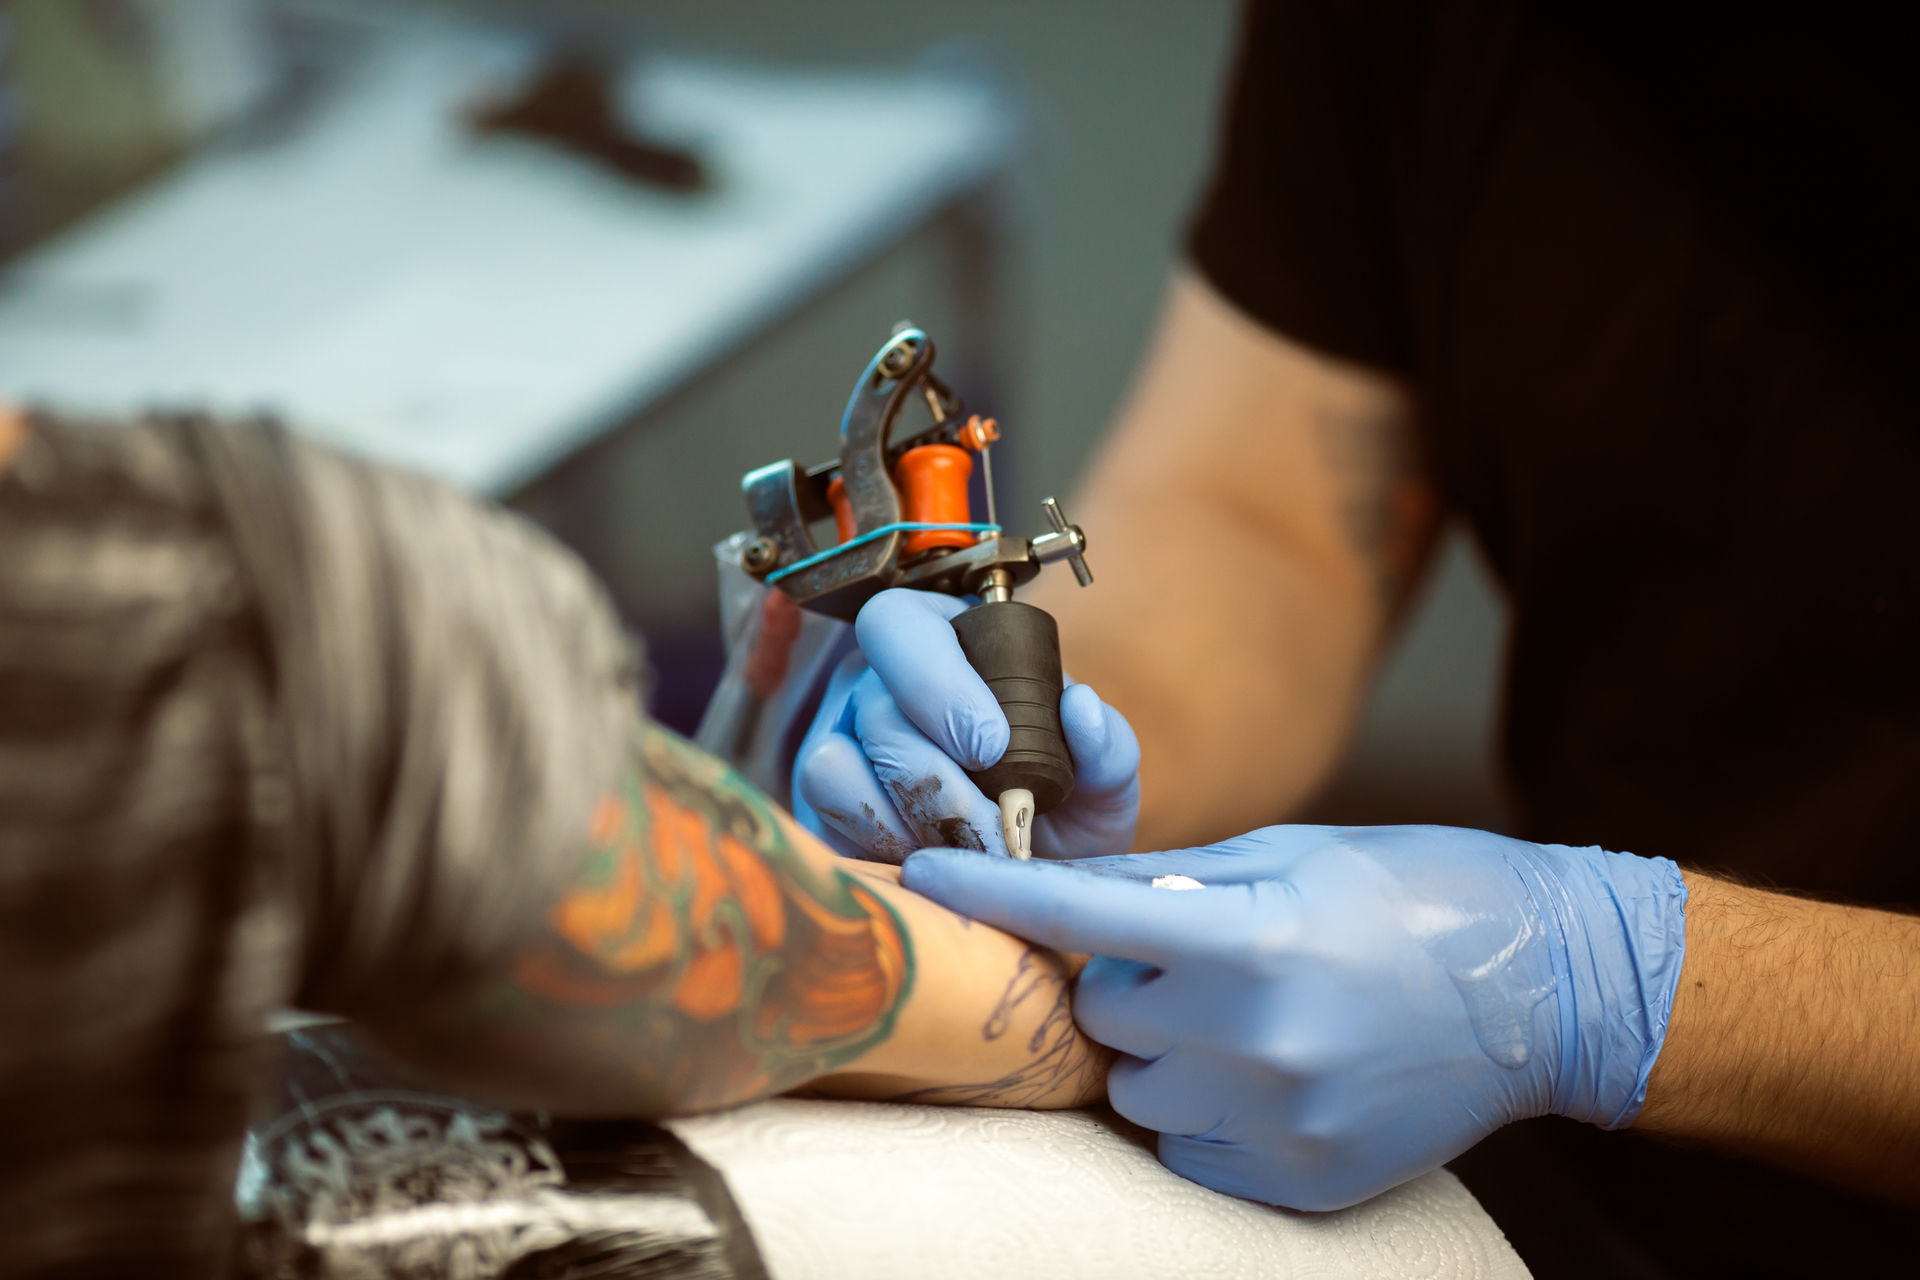 Arm being tattooed by tattoo artist with gloves on